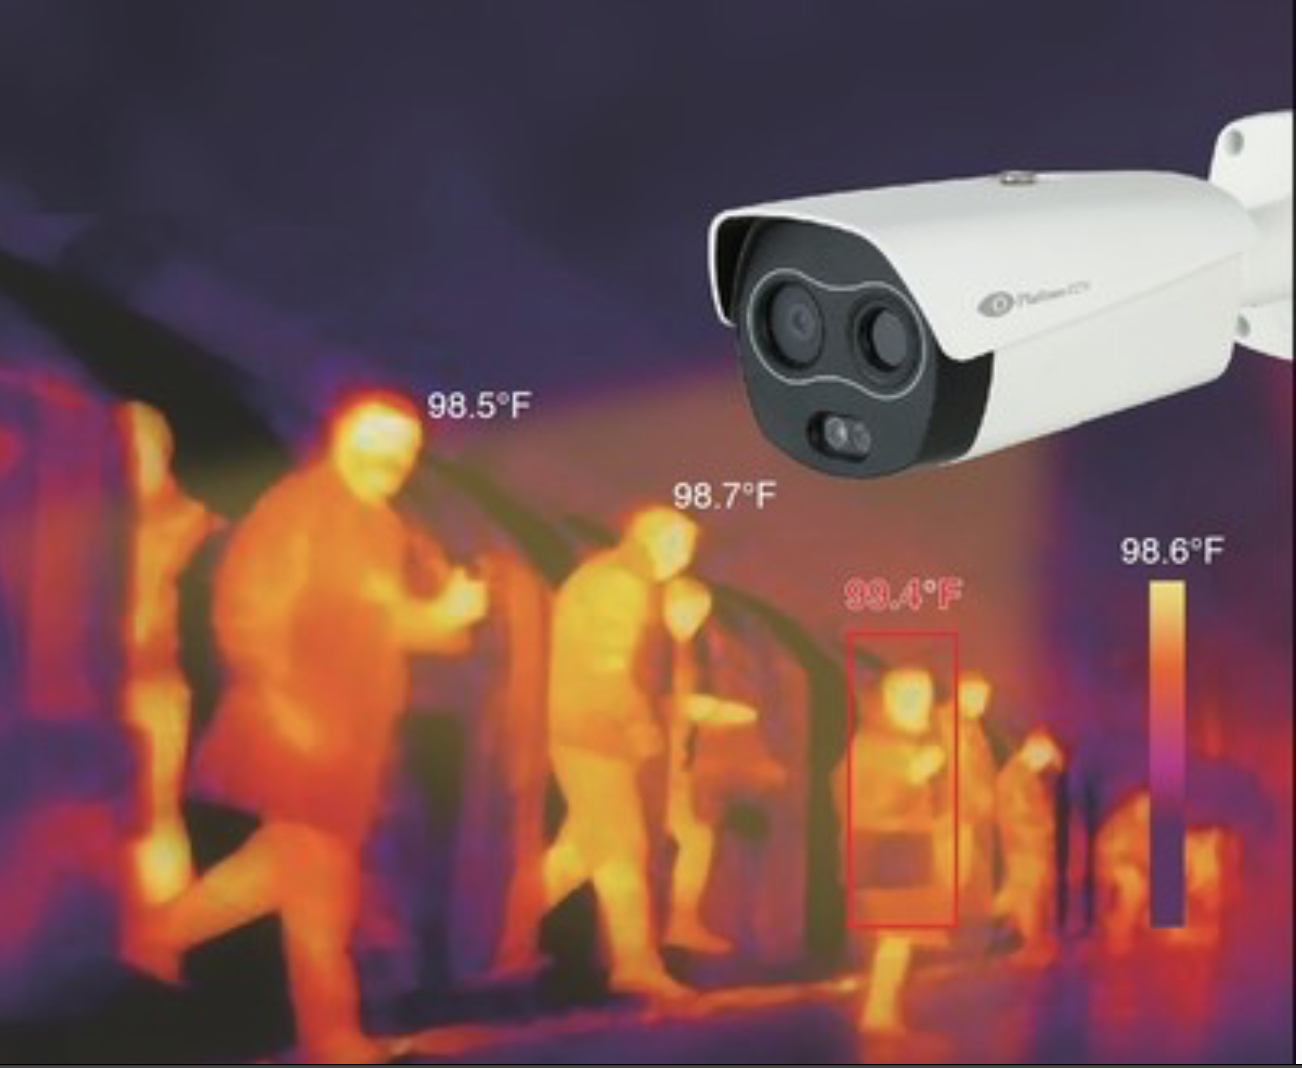 Platinum CCTV unveils camera that reads body temps and provides security